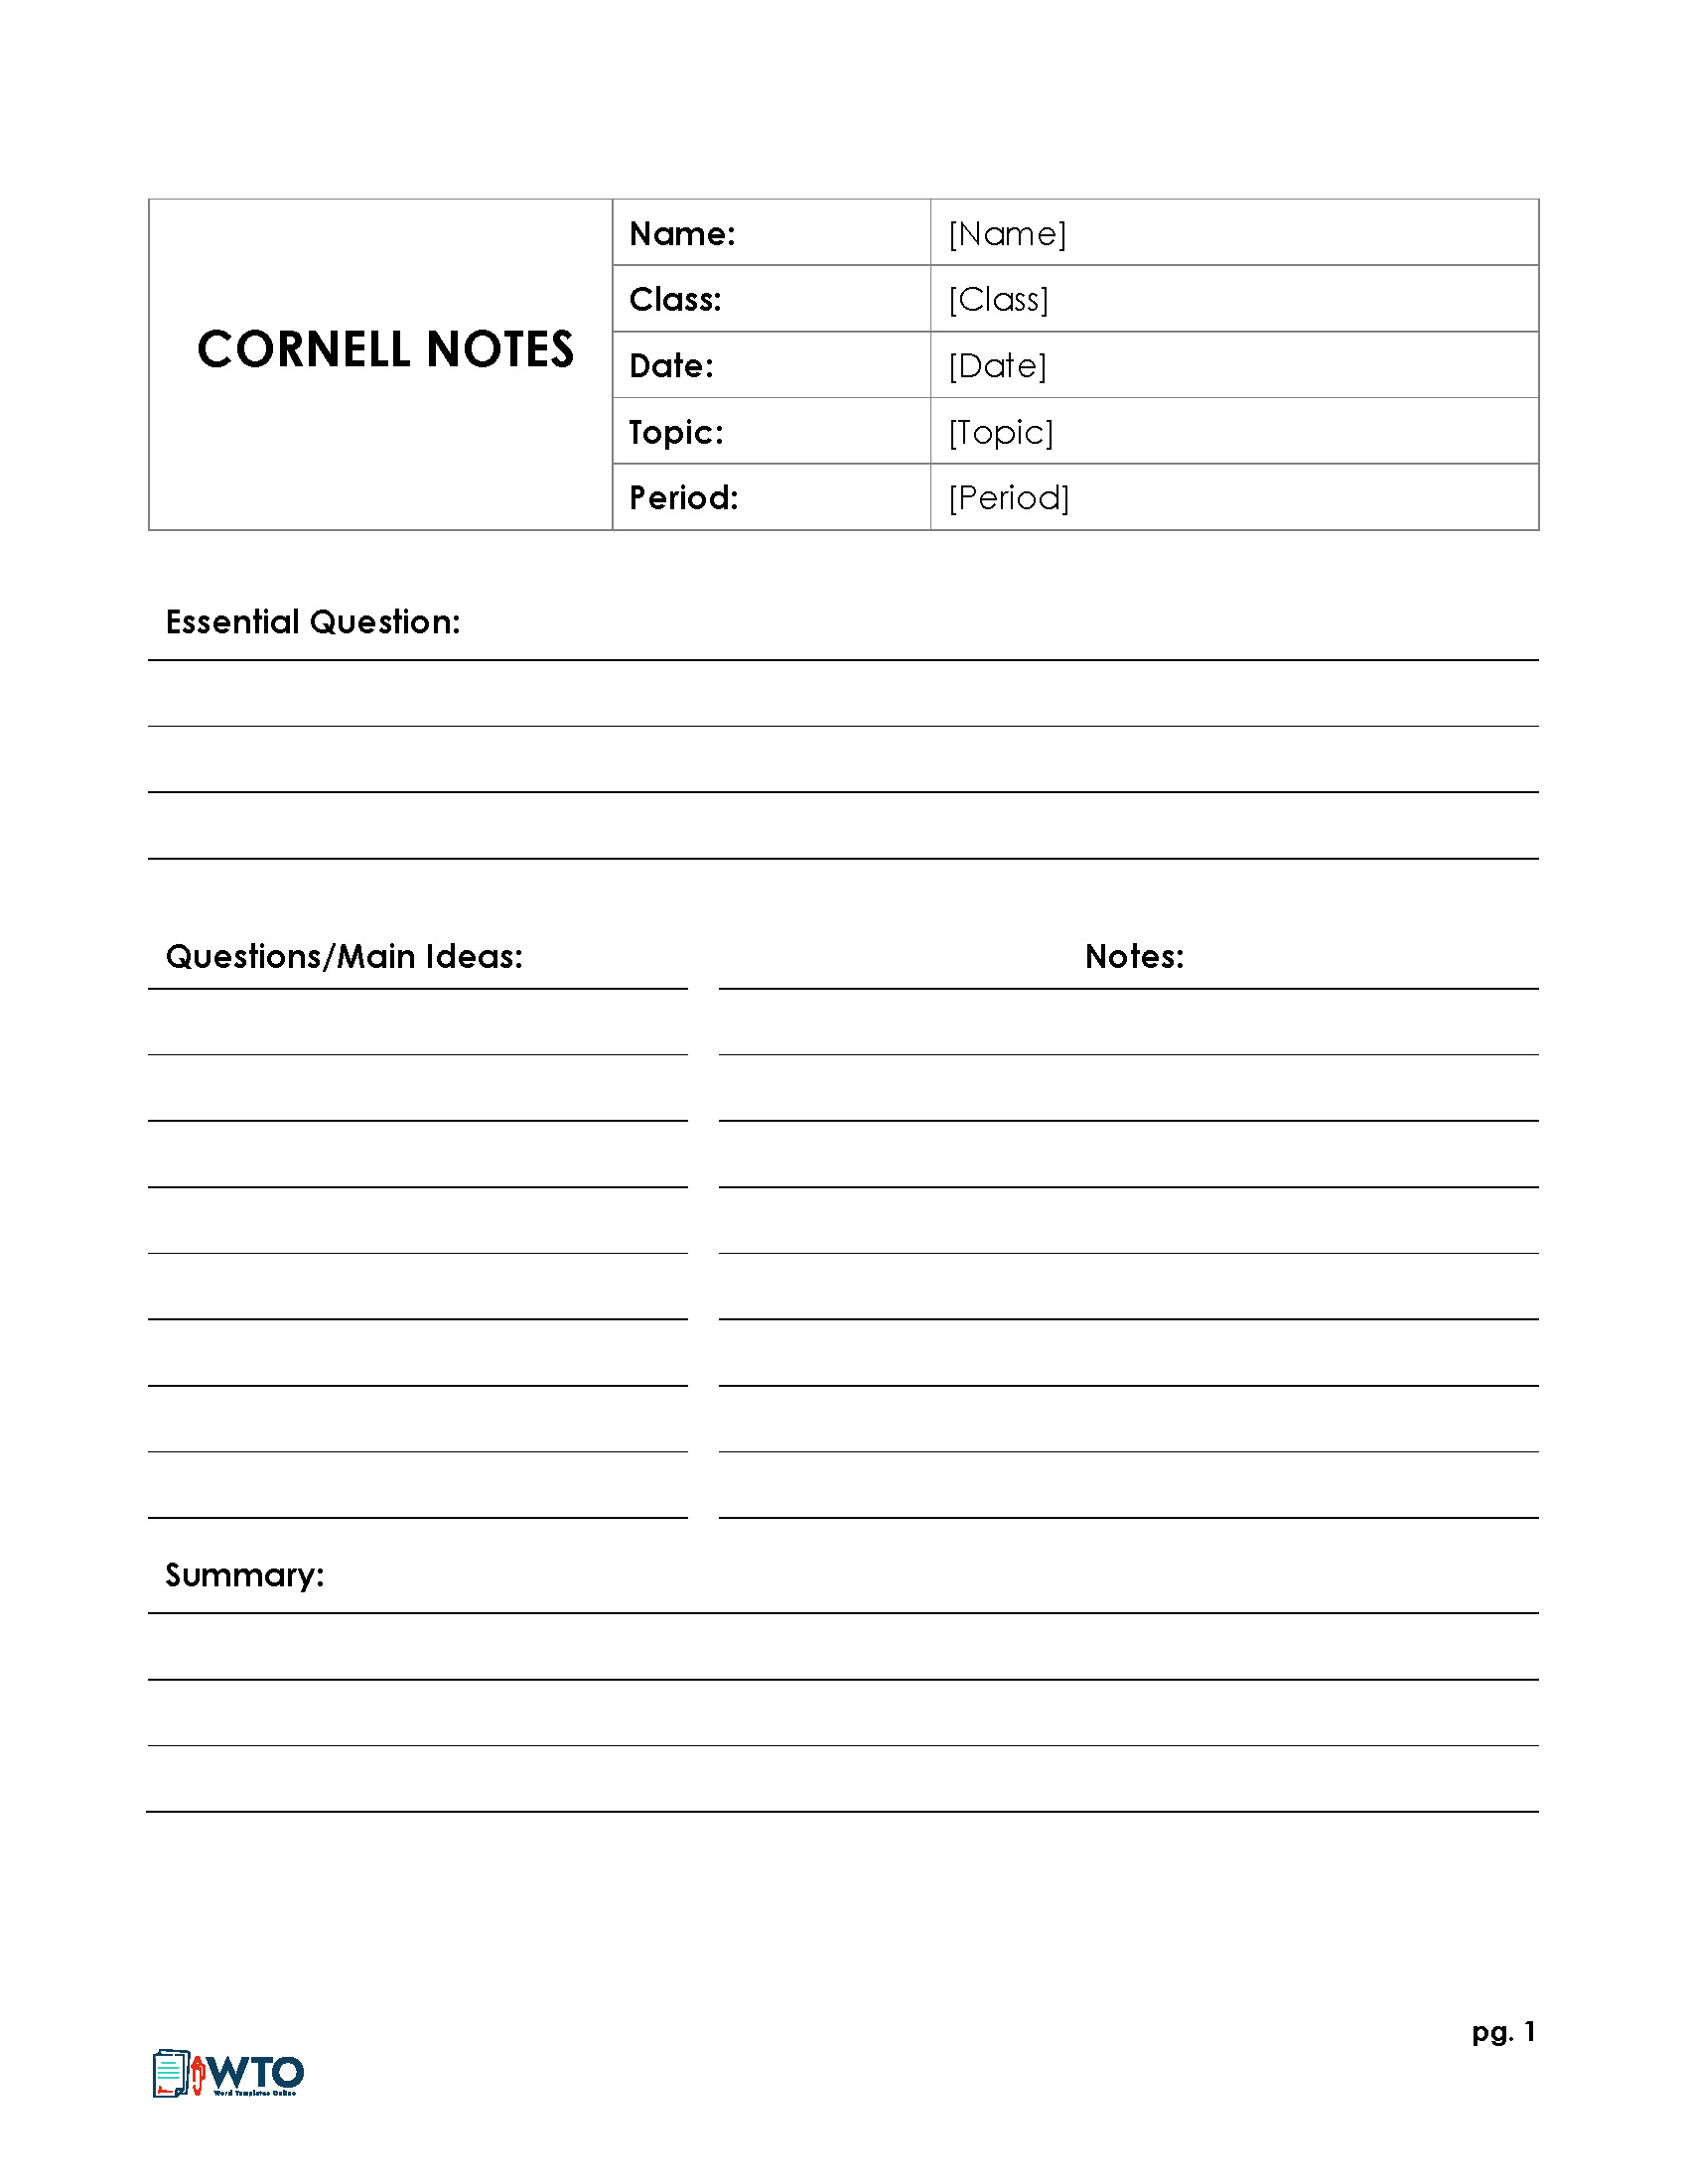 23 Free Cornell Note Templates (Cornell Note Taking Explained) With Regard To Avid Cornell Notes Template Pdf